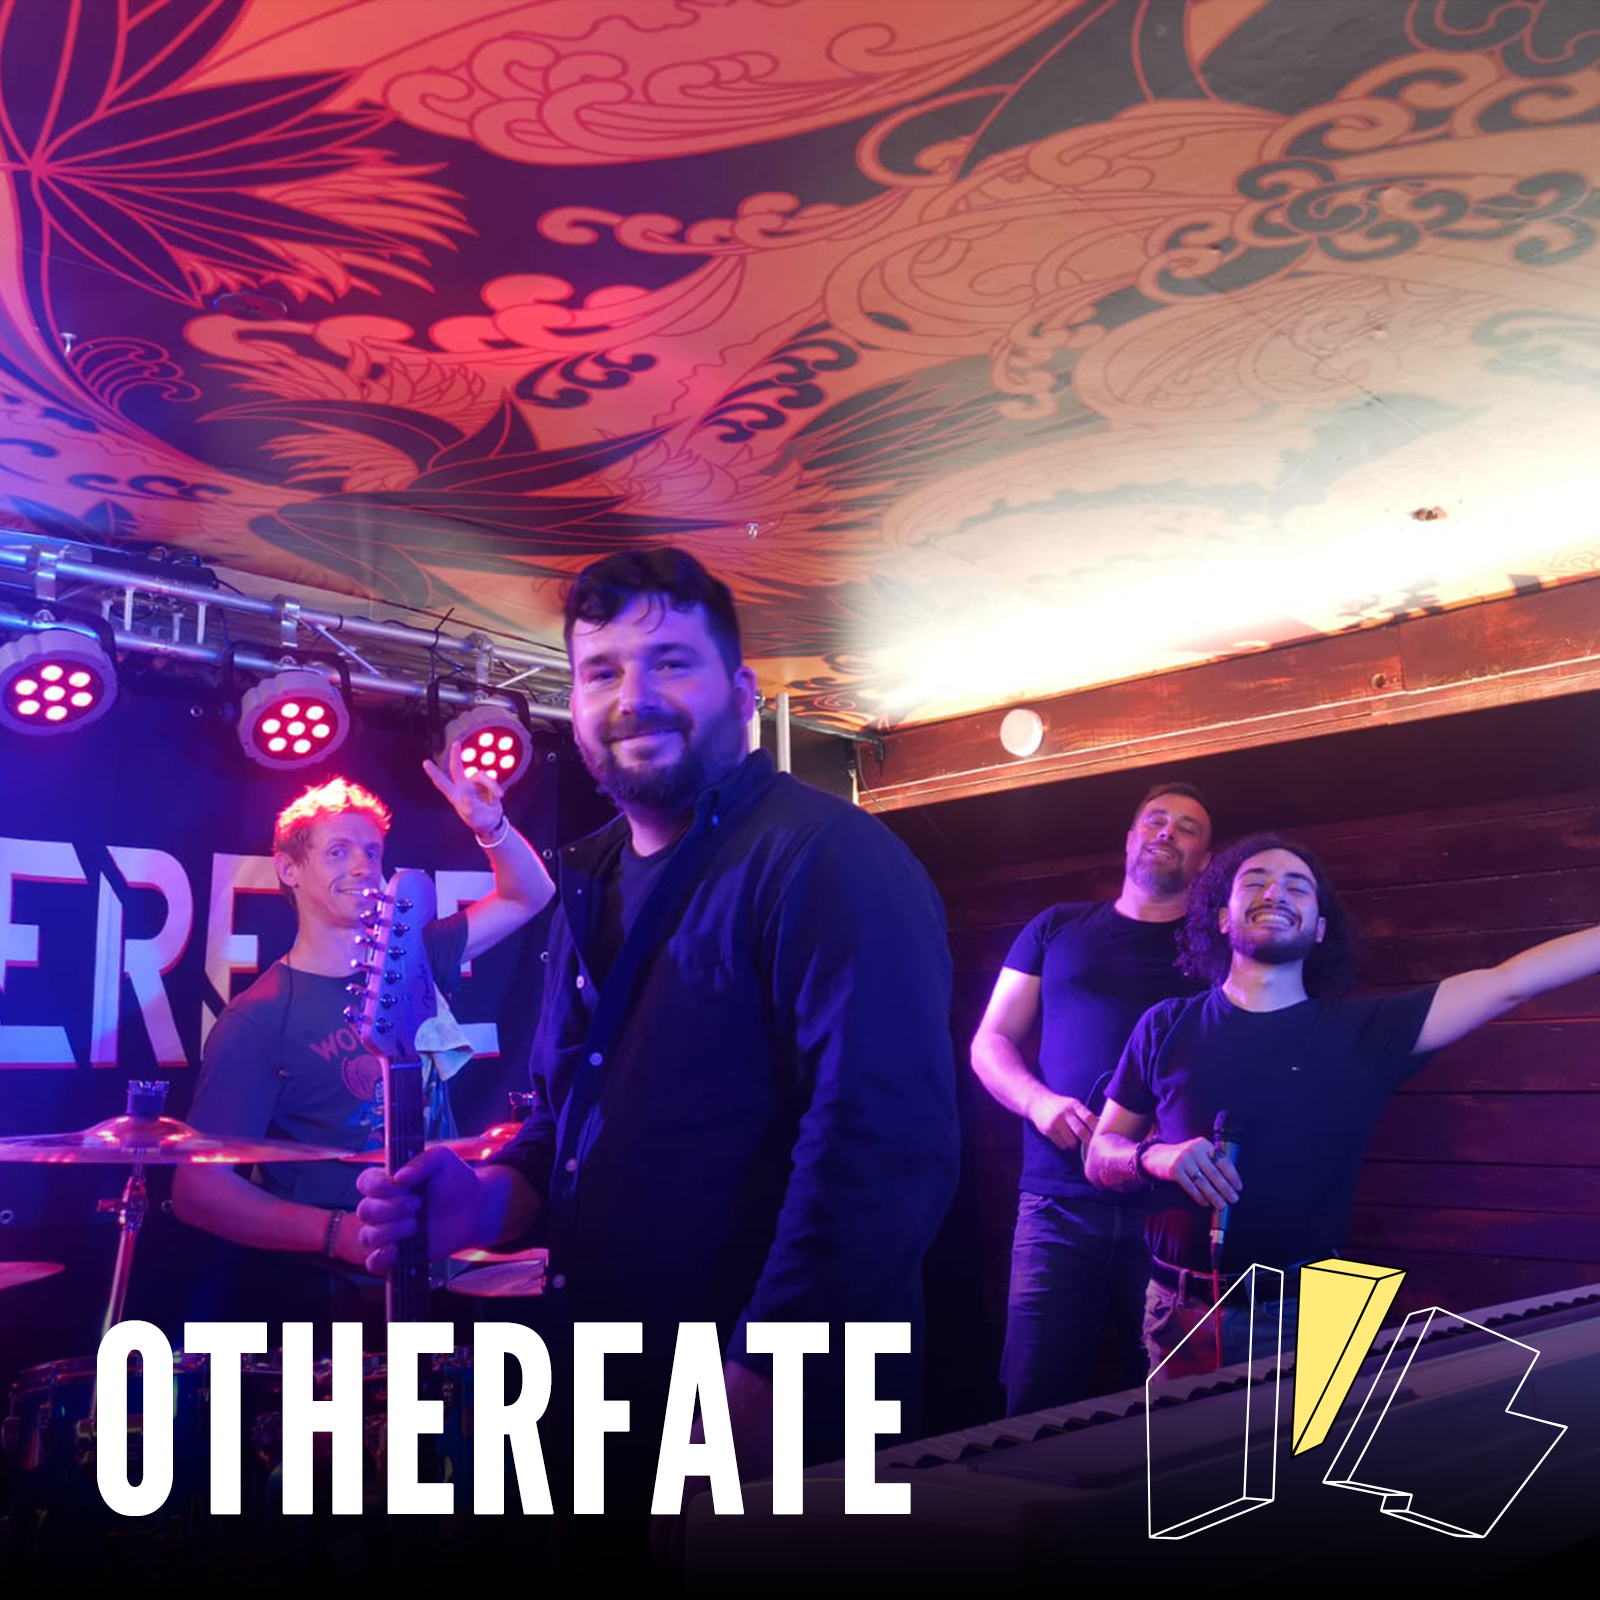 Le groupe Otherfate